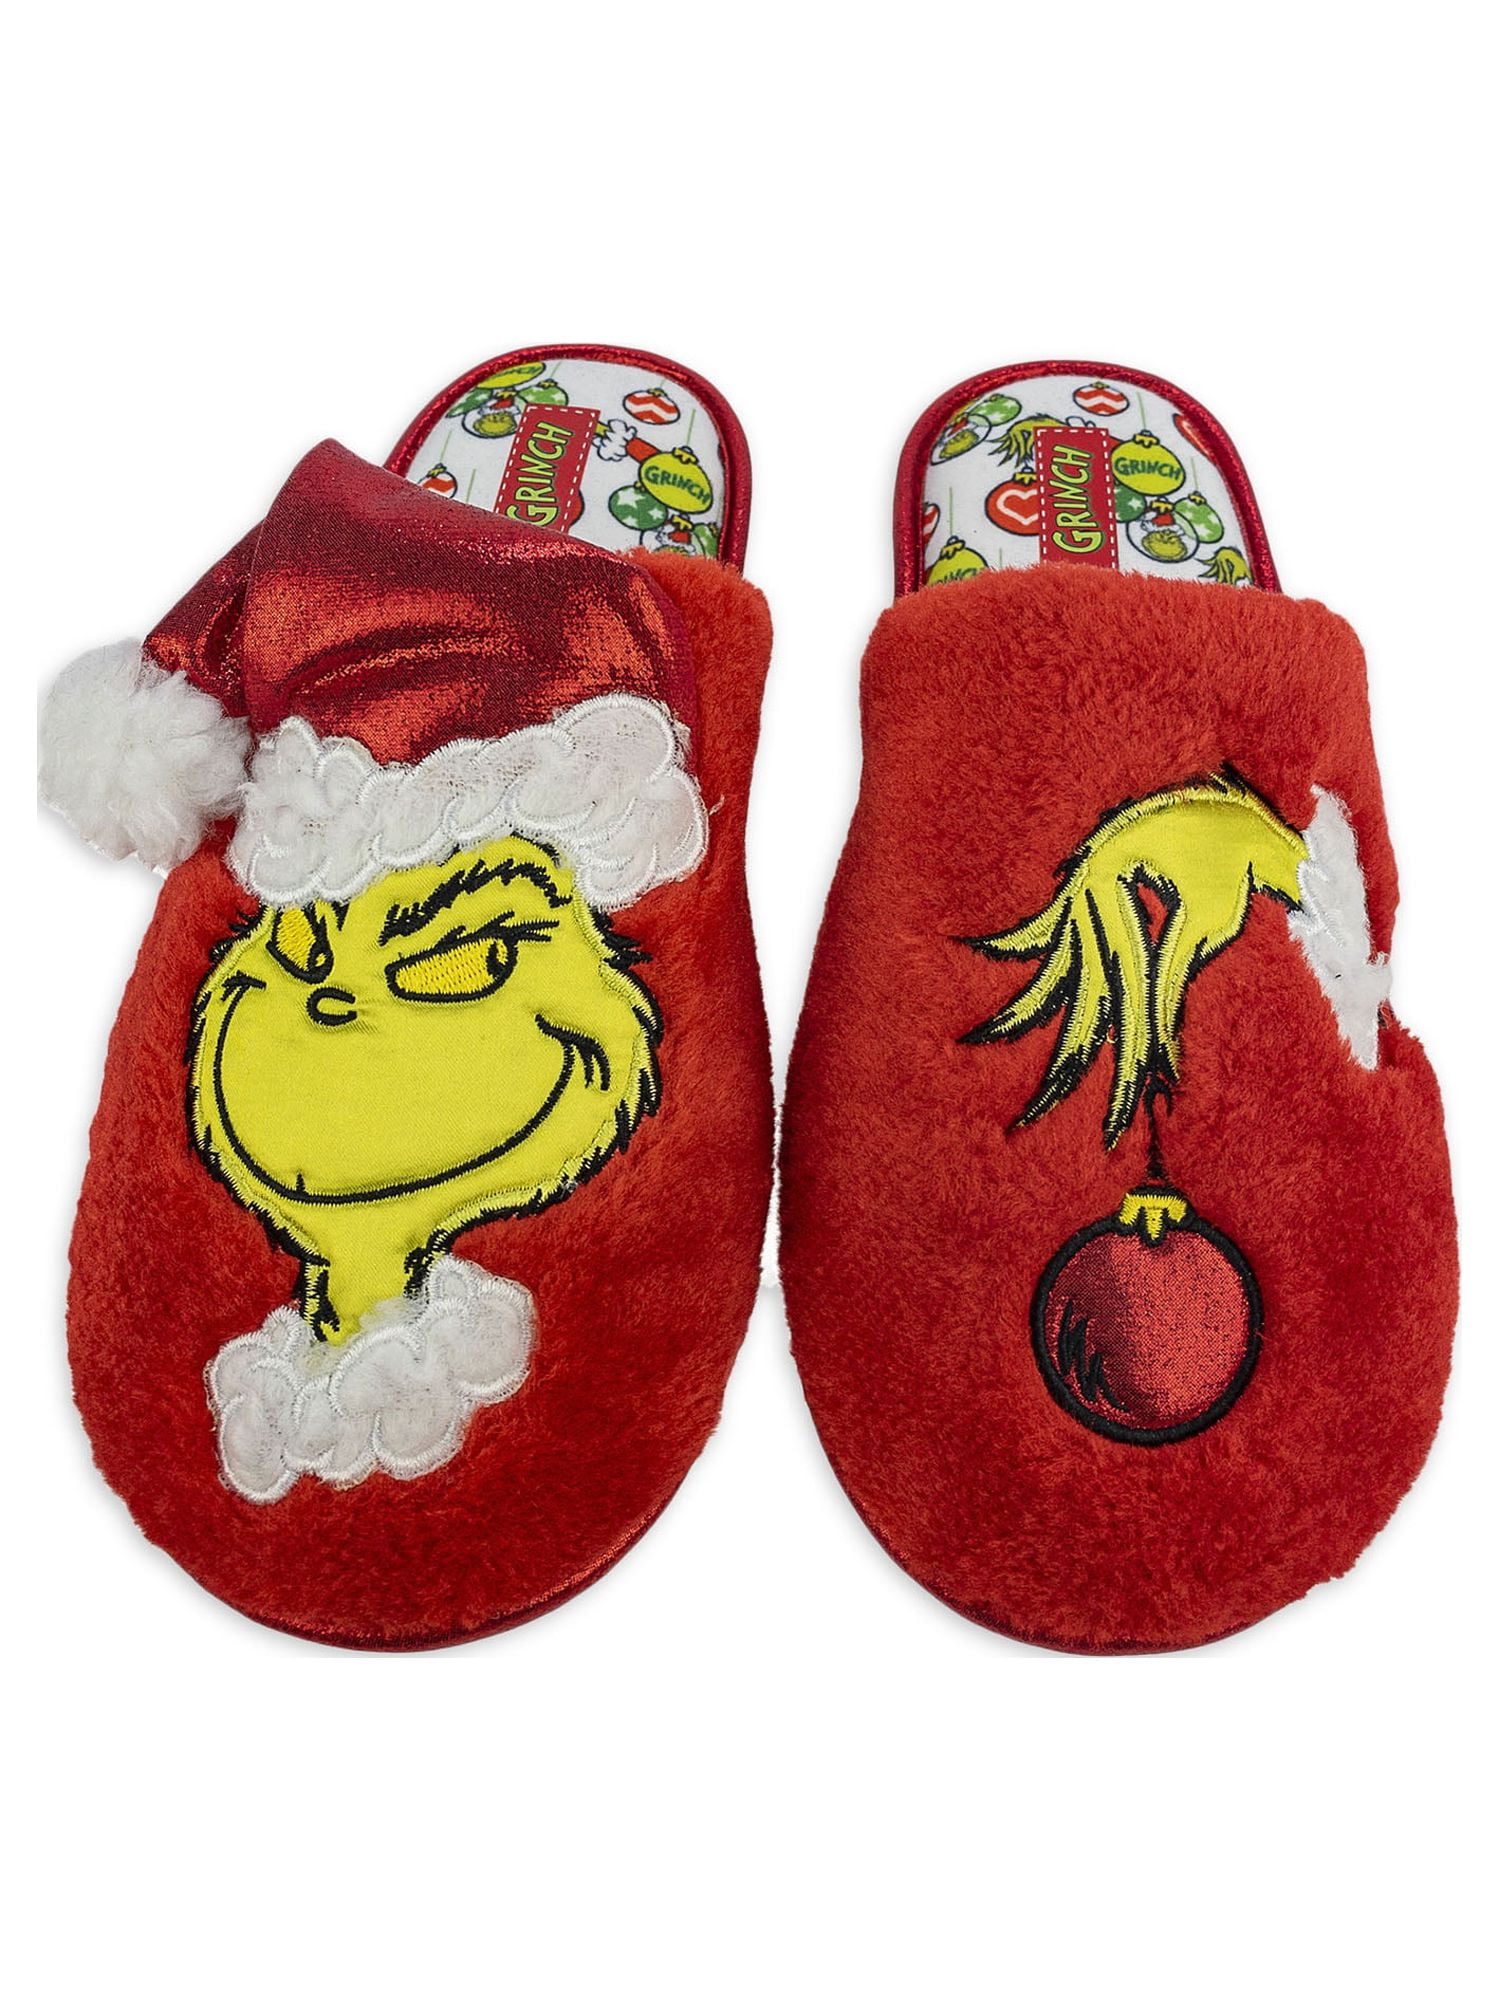 Dr. Seuss Family Grinch Slippers, Sizes Toddler-Adult - Walmart.com